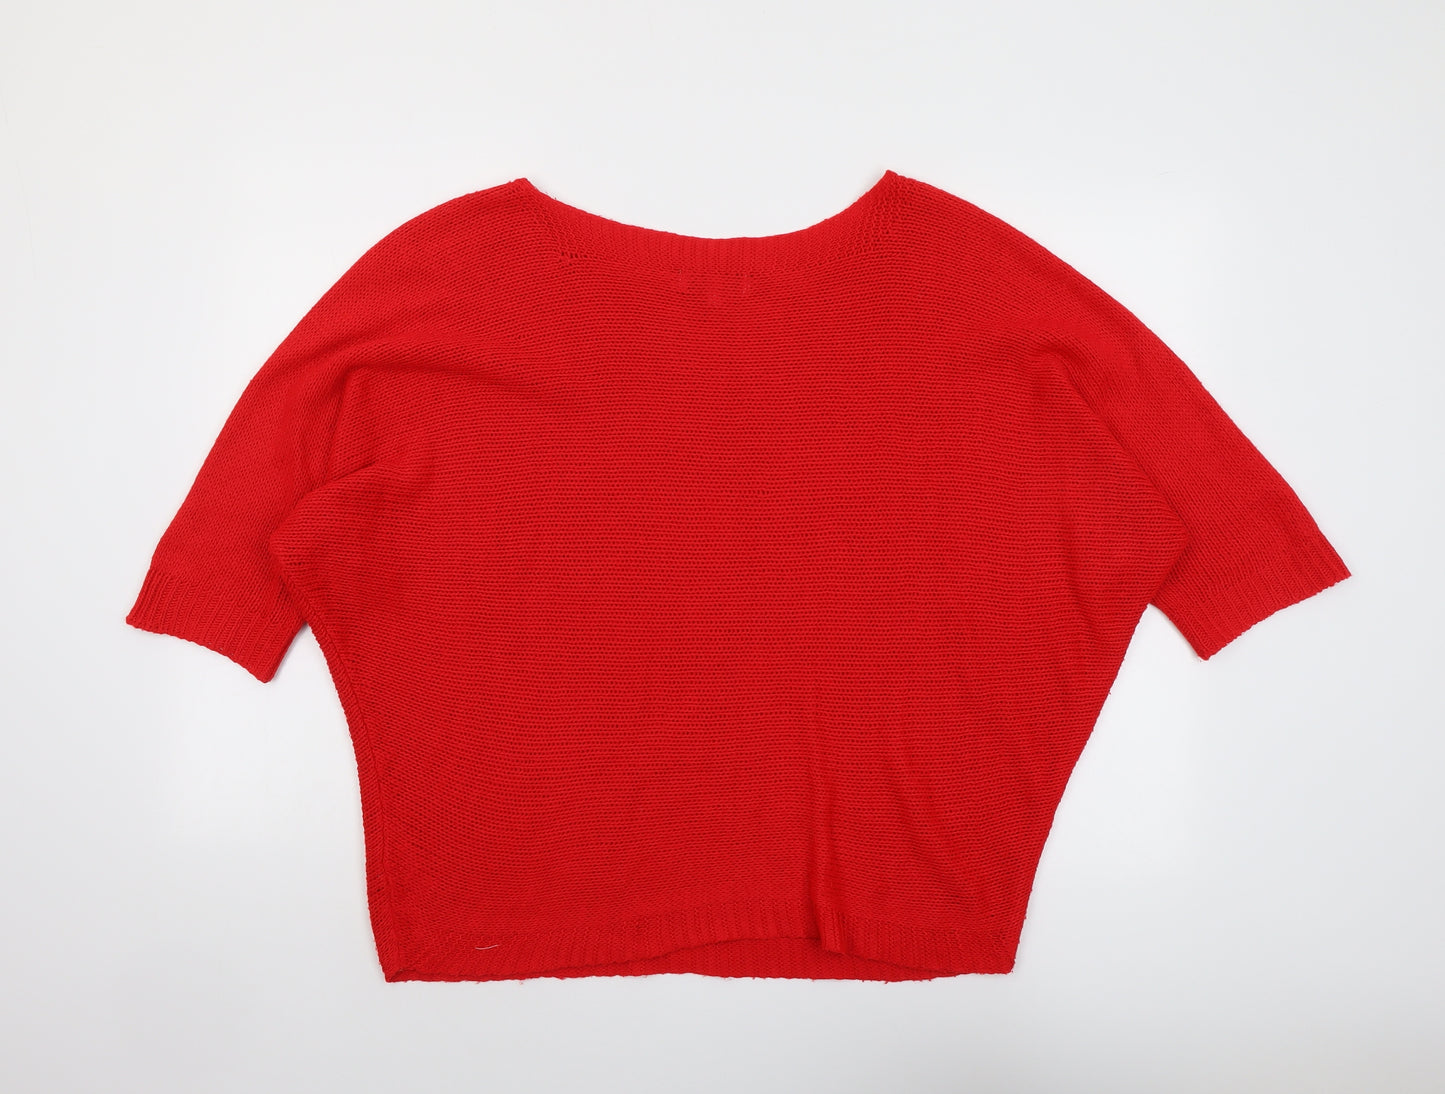 Isabella D. Womens Red Round Neck Acrylic Pullover Jumper Size M